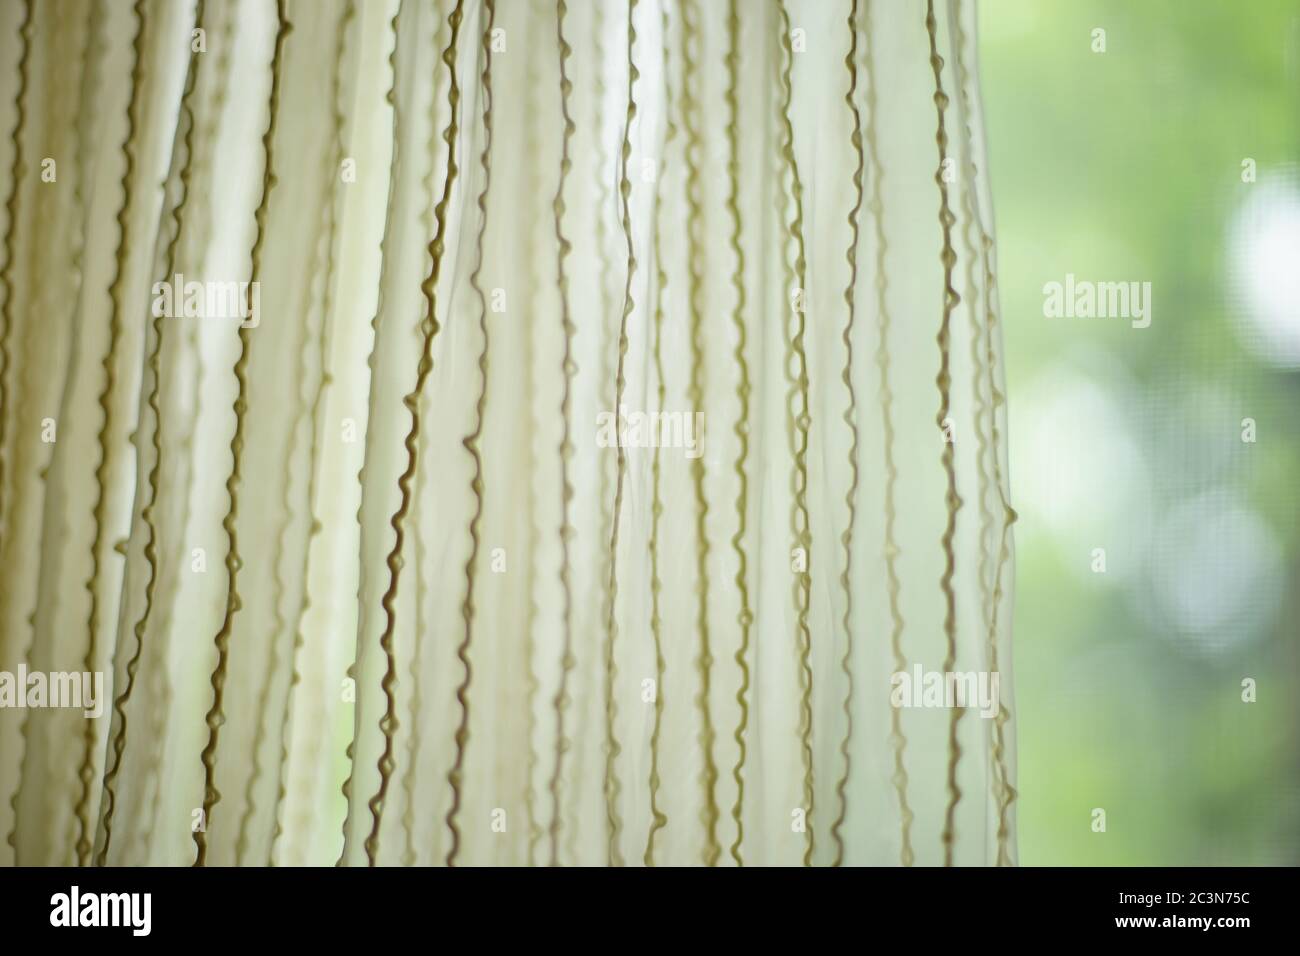 Matte tulle with vertical threads pattern. Green blurred garden in background, front view Stock Photo